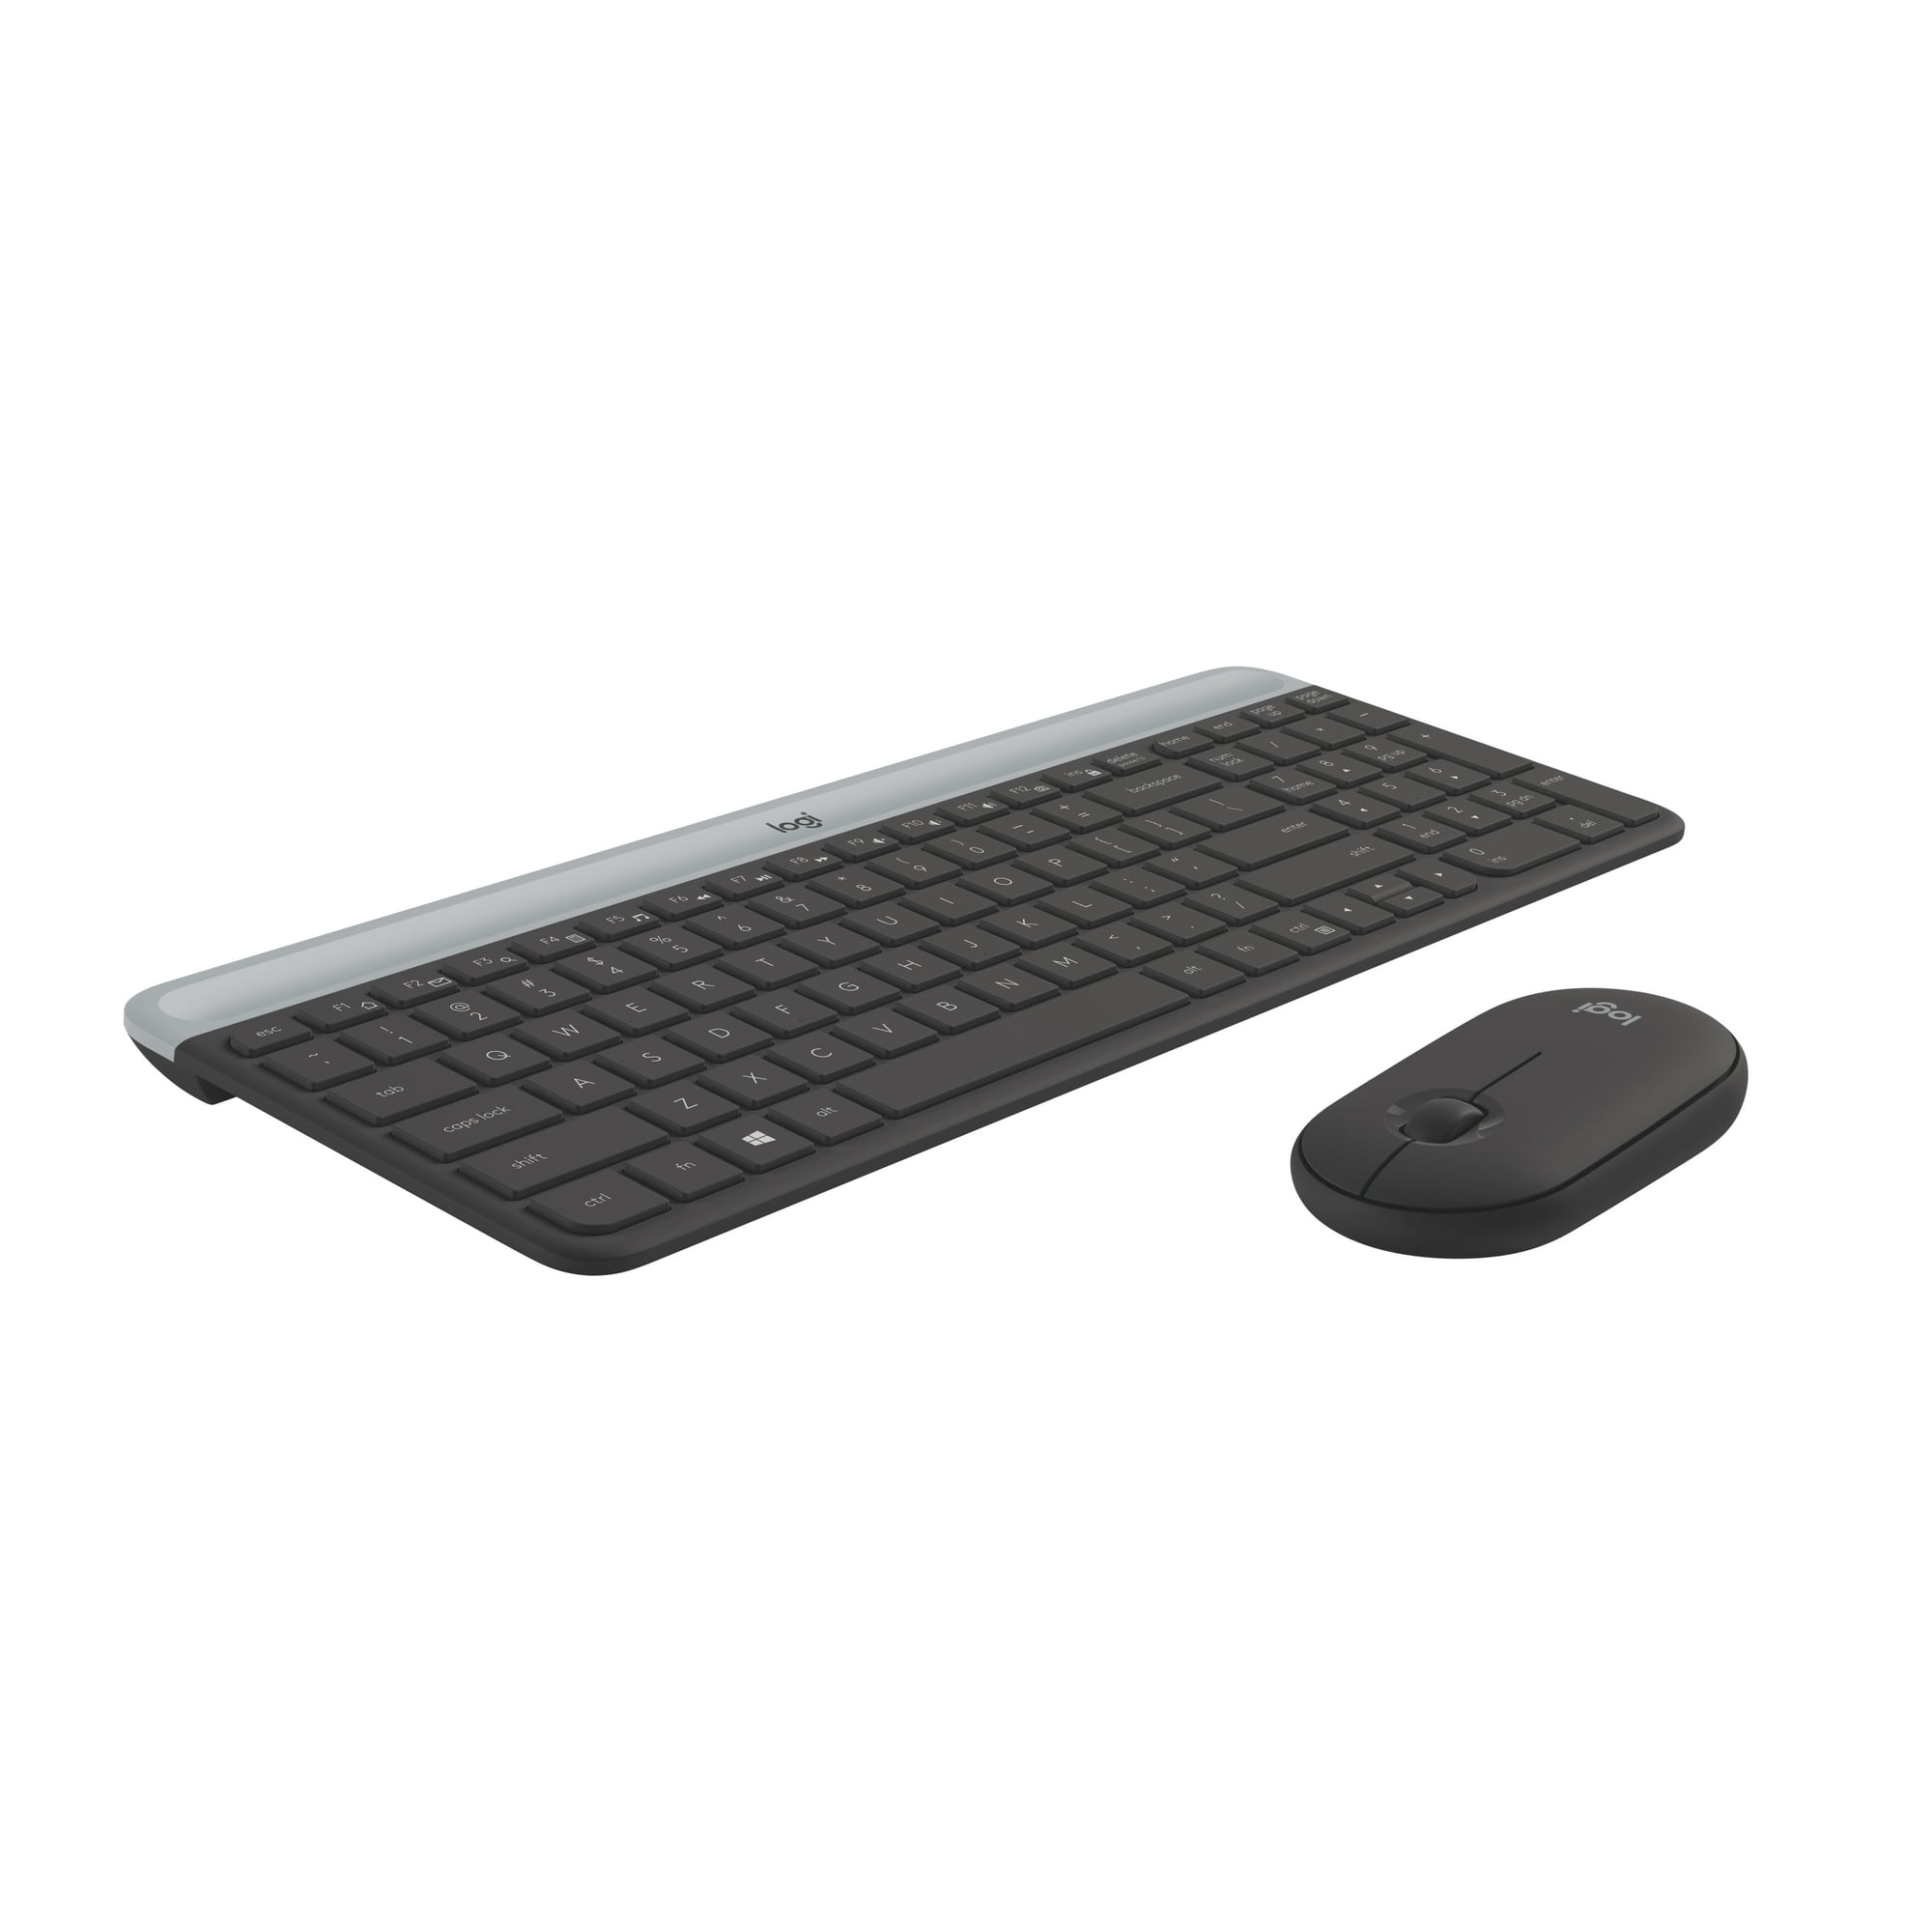 Logitech Slim Wireless Keyboard and Mouse Combo - Low Profile Compact Layout, Ultra Quiet Operation, 2.4 GHz USB Receiver with Plug and Play Connectivity, Long Battery Life, Graphite